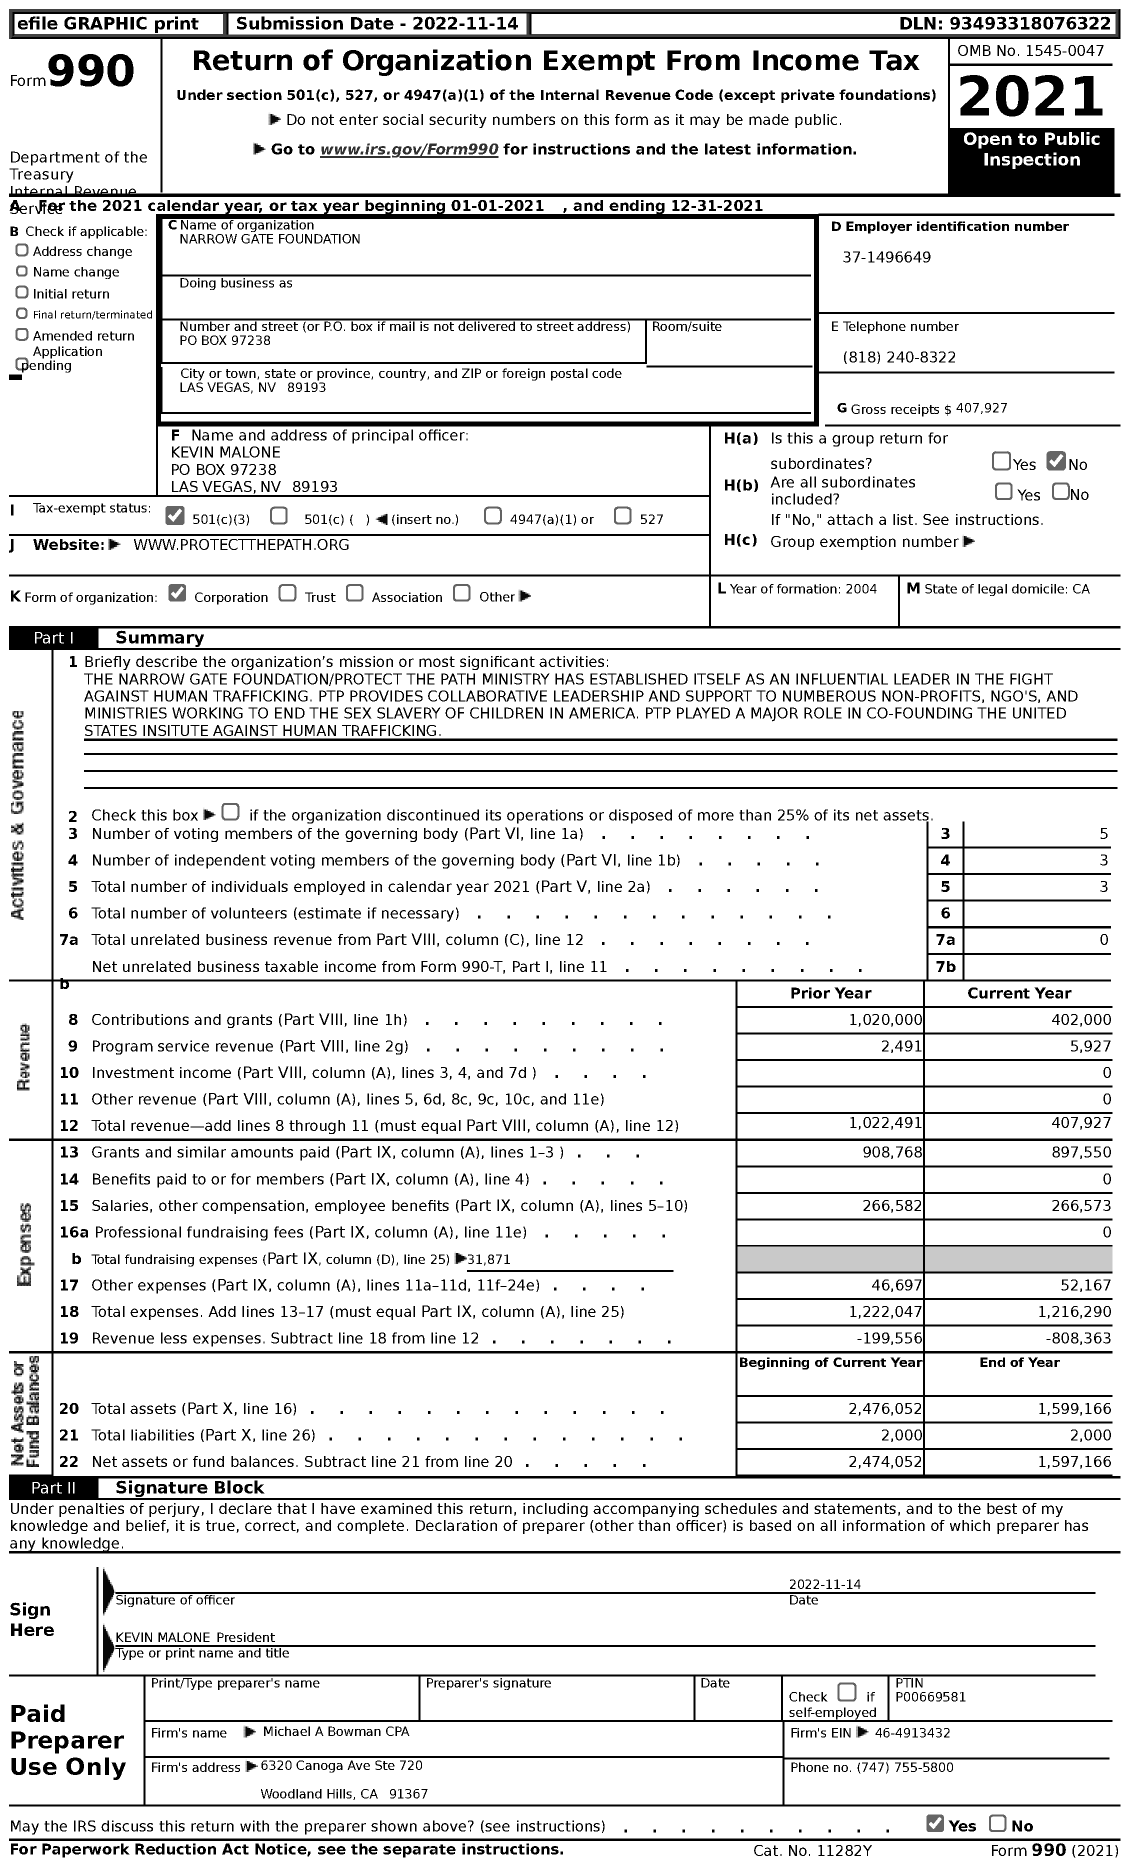 Image of first page of 2021 Form 990 for Narrow Gate Foundation / Protect the Path